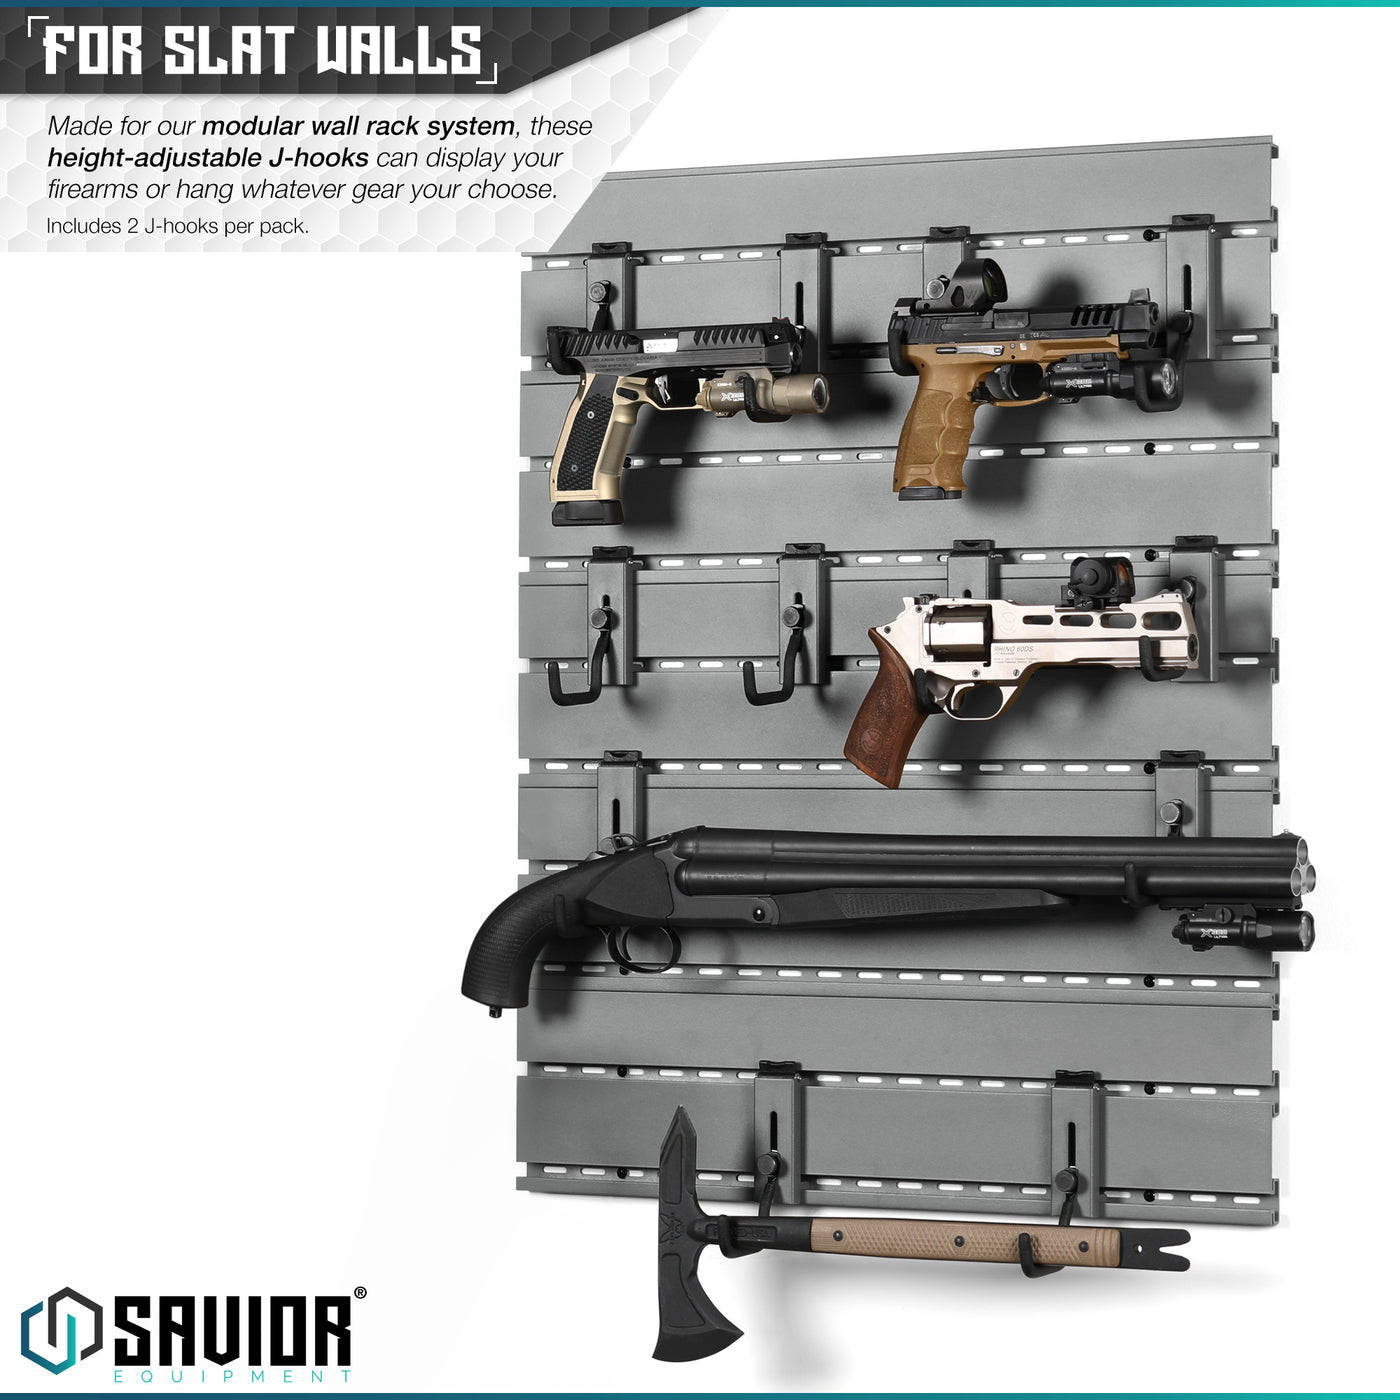 For Slat Walls - Made for our modular wall rack system, these height-adjustable J-hooks can display your firearms horizontally or hang whatever gear your choose. Includes 2 J-hooks per pack.